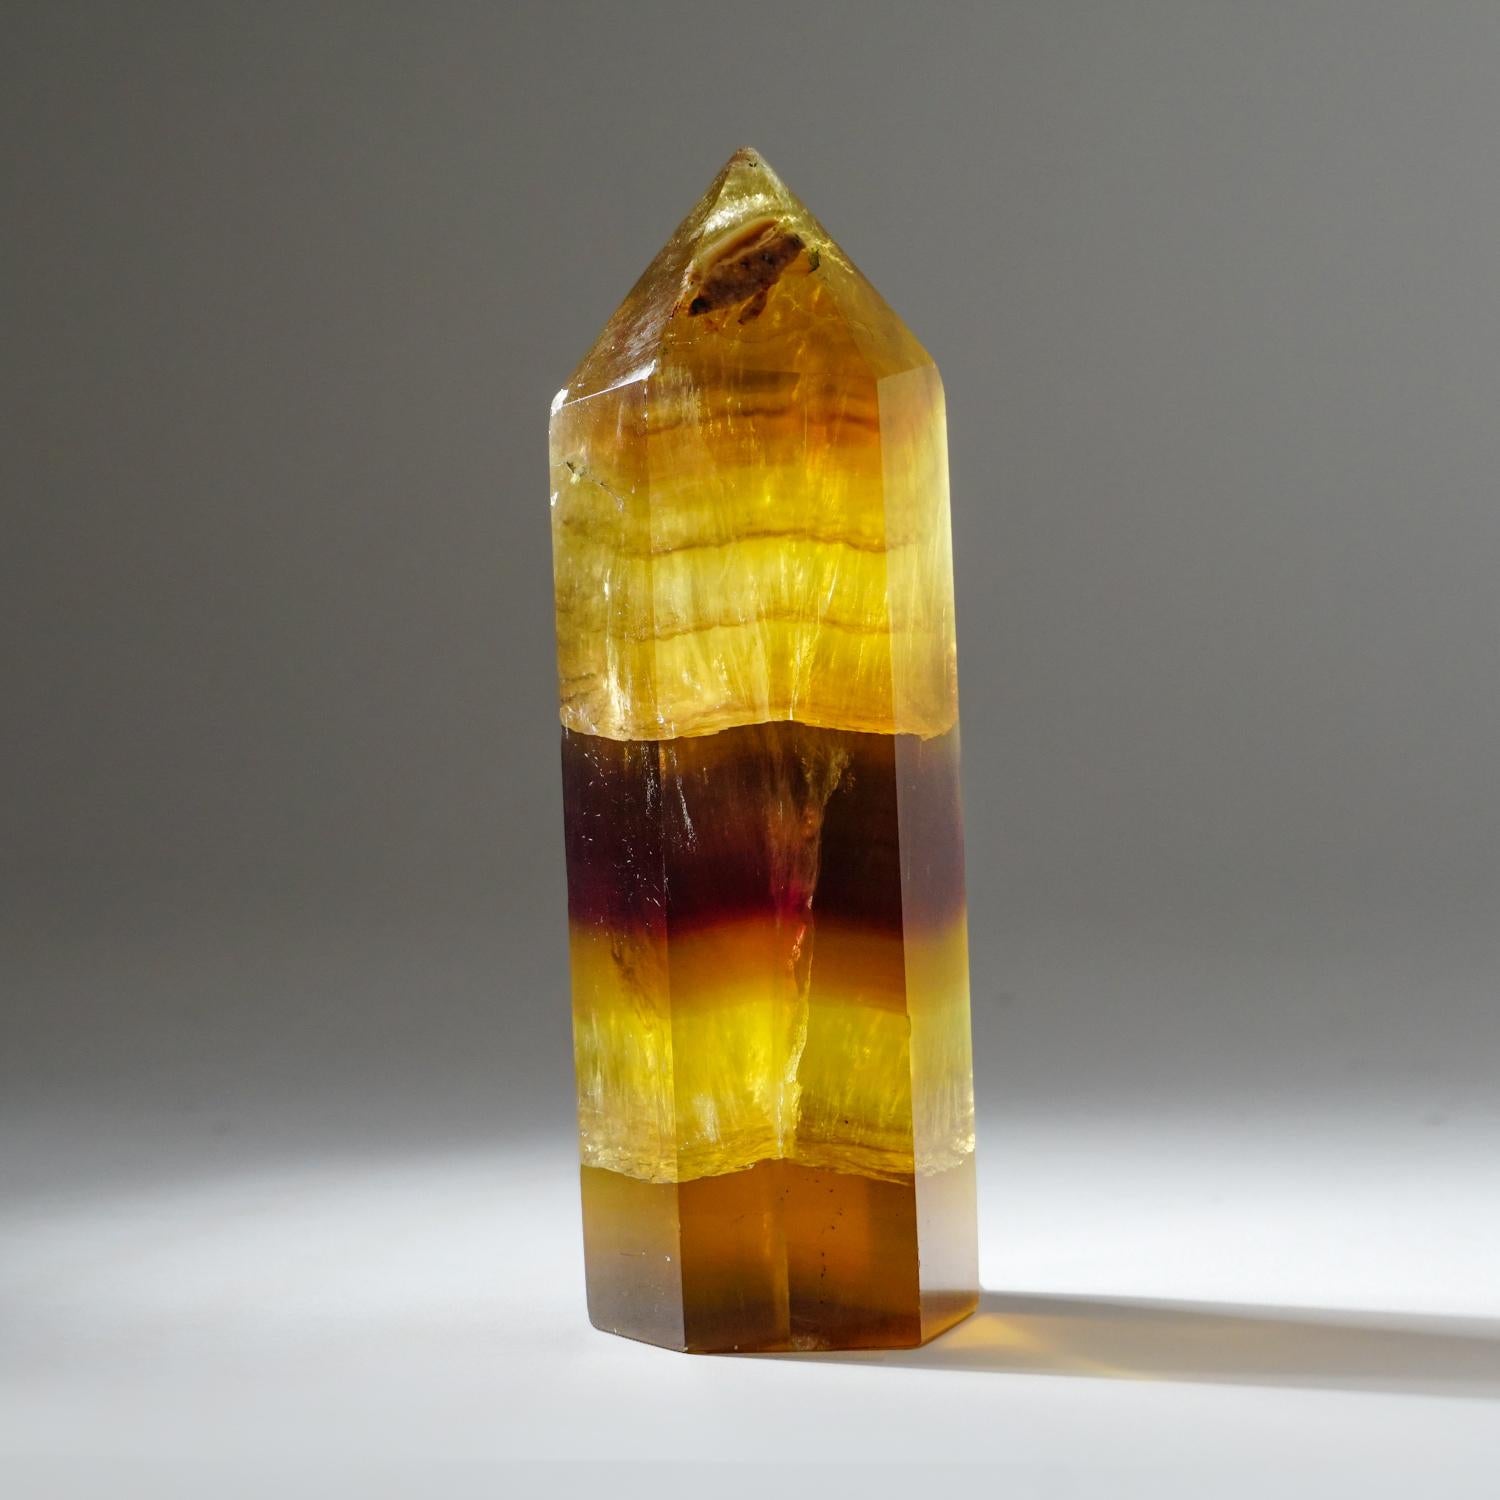 AAA quality, lustrous gem translucent yellow fluorite polished point. This specimen has bright rich honey yellow color and displays a base of ethereal gold adorned with subtle dark purple stripes. Once illuminated, its unique golden shimmer comes to